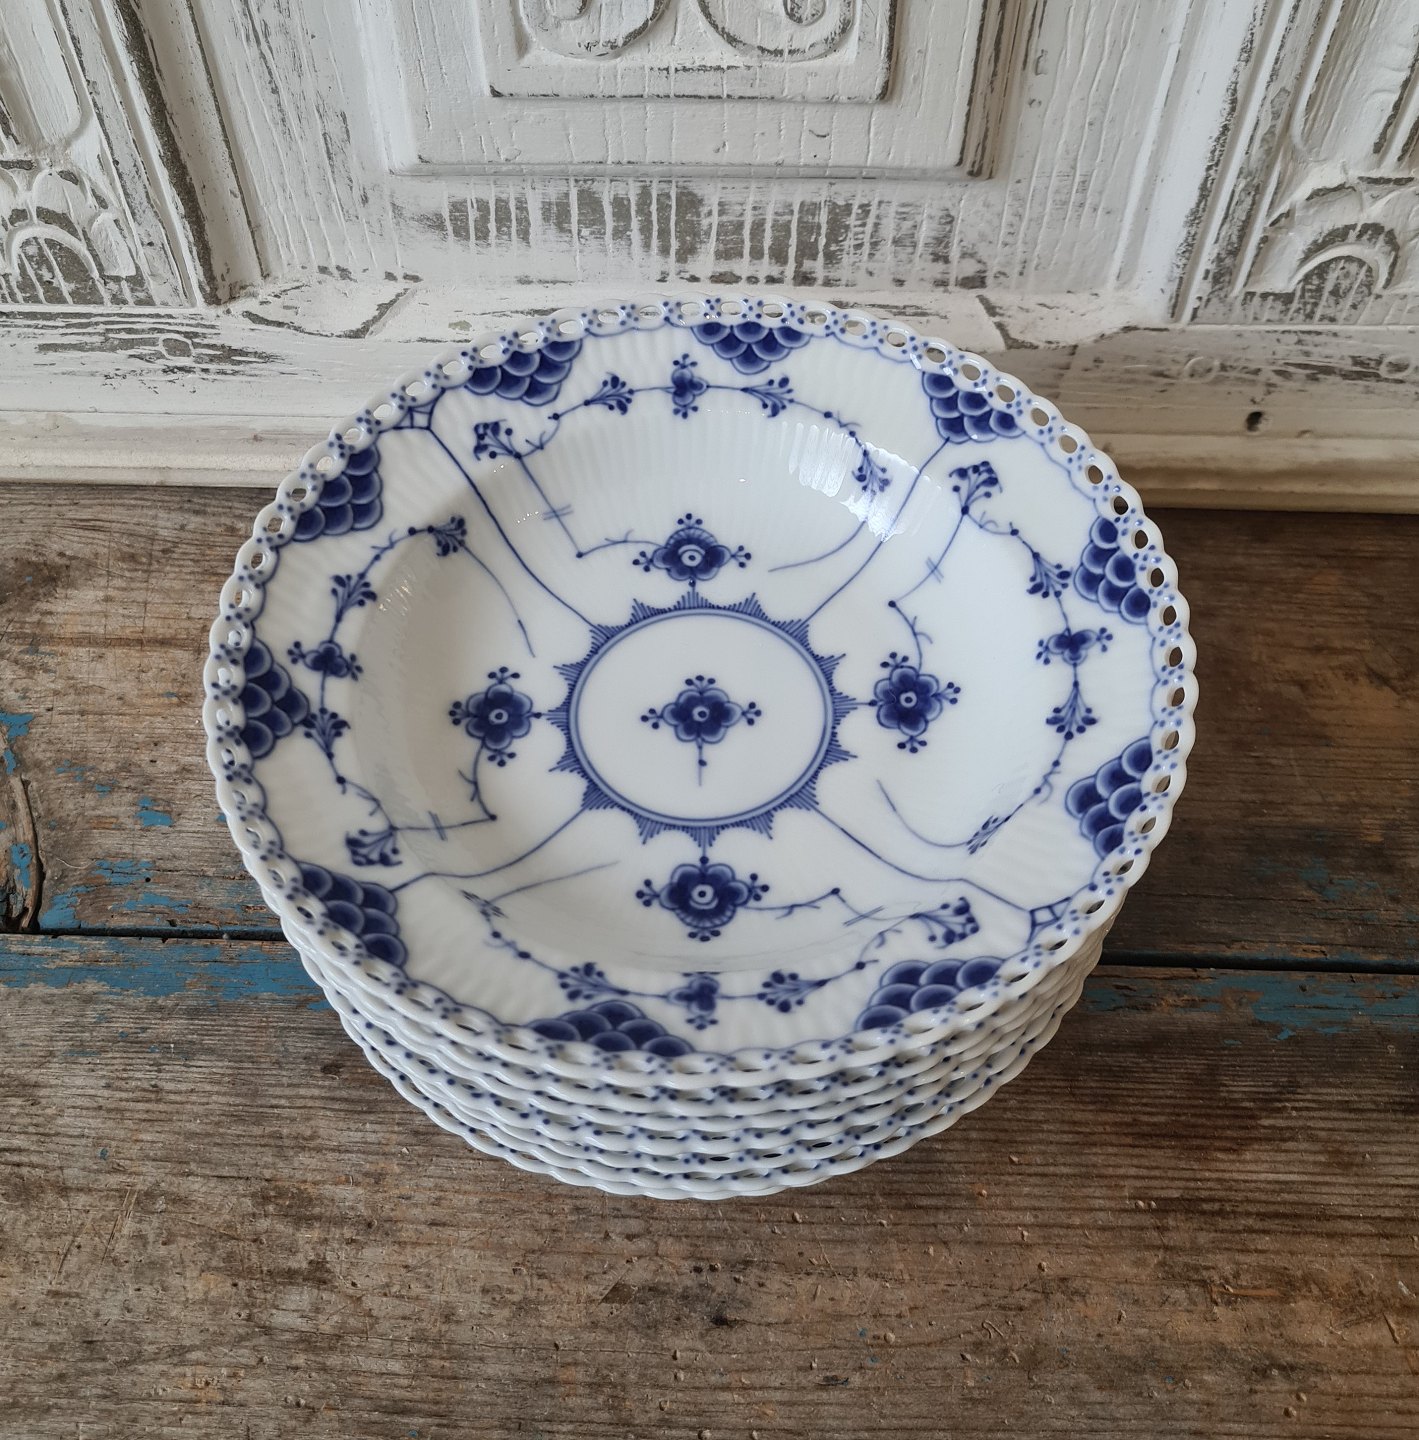  Royal Copenhagen Blue Fluted full lace small soup plate  no. 1170